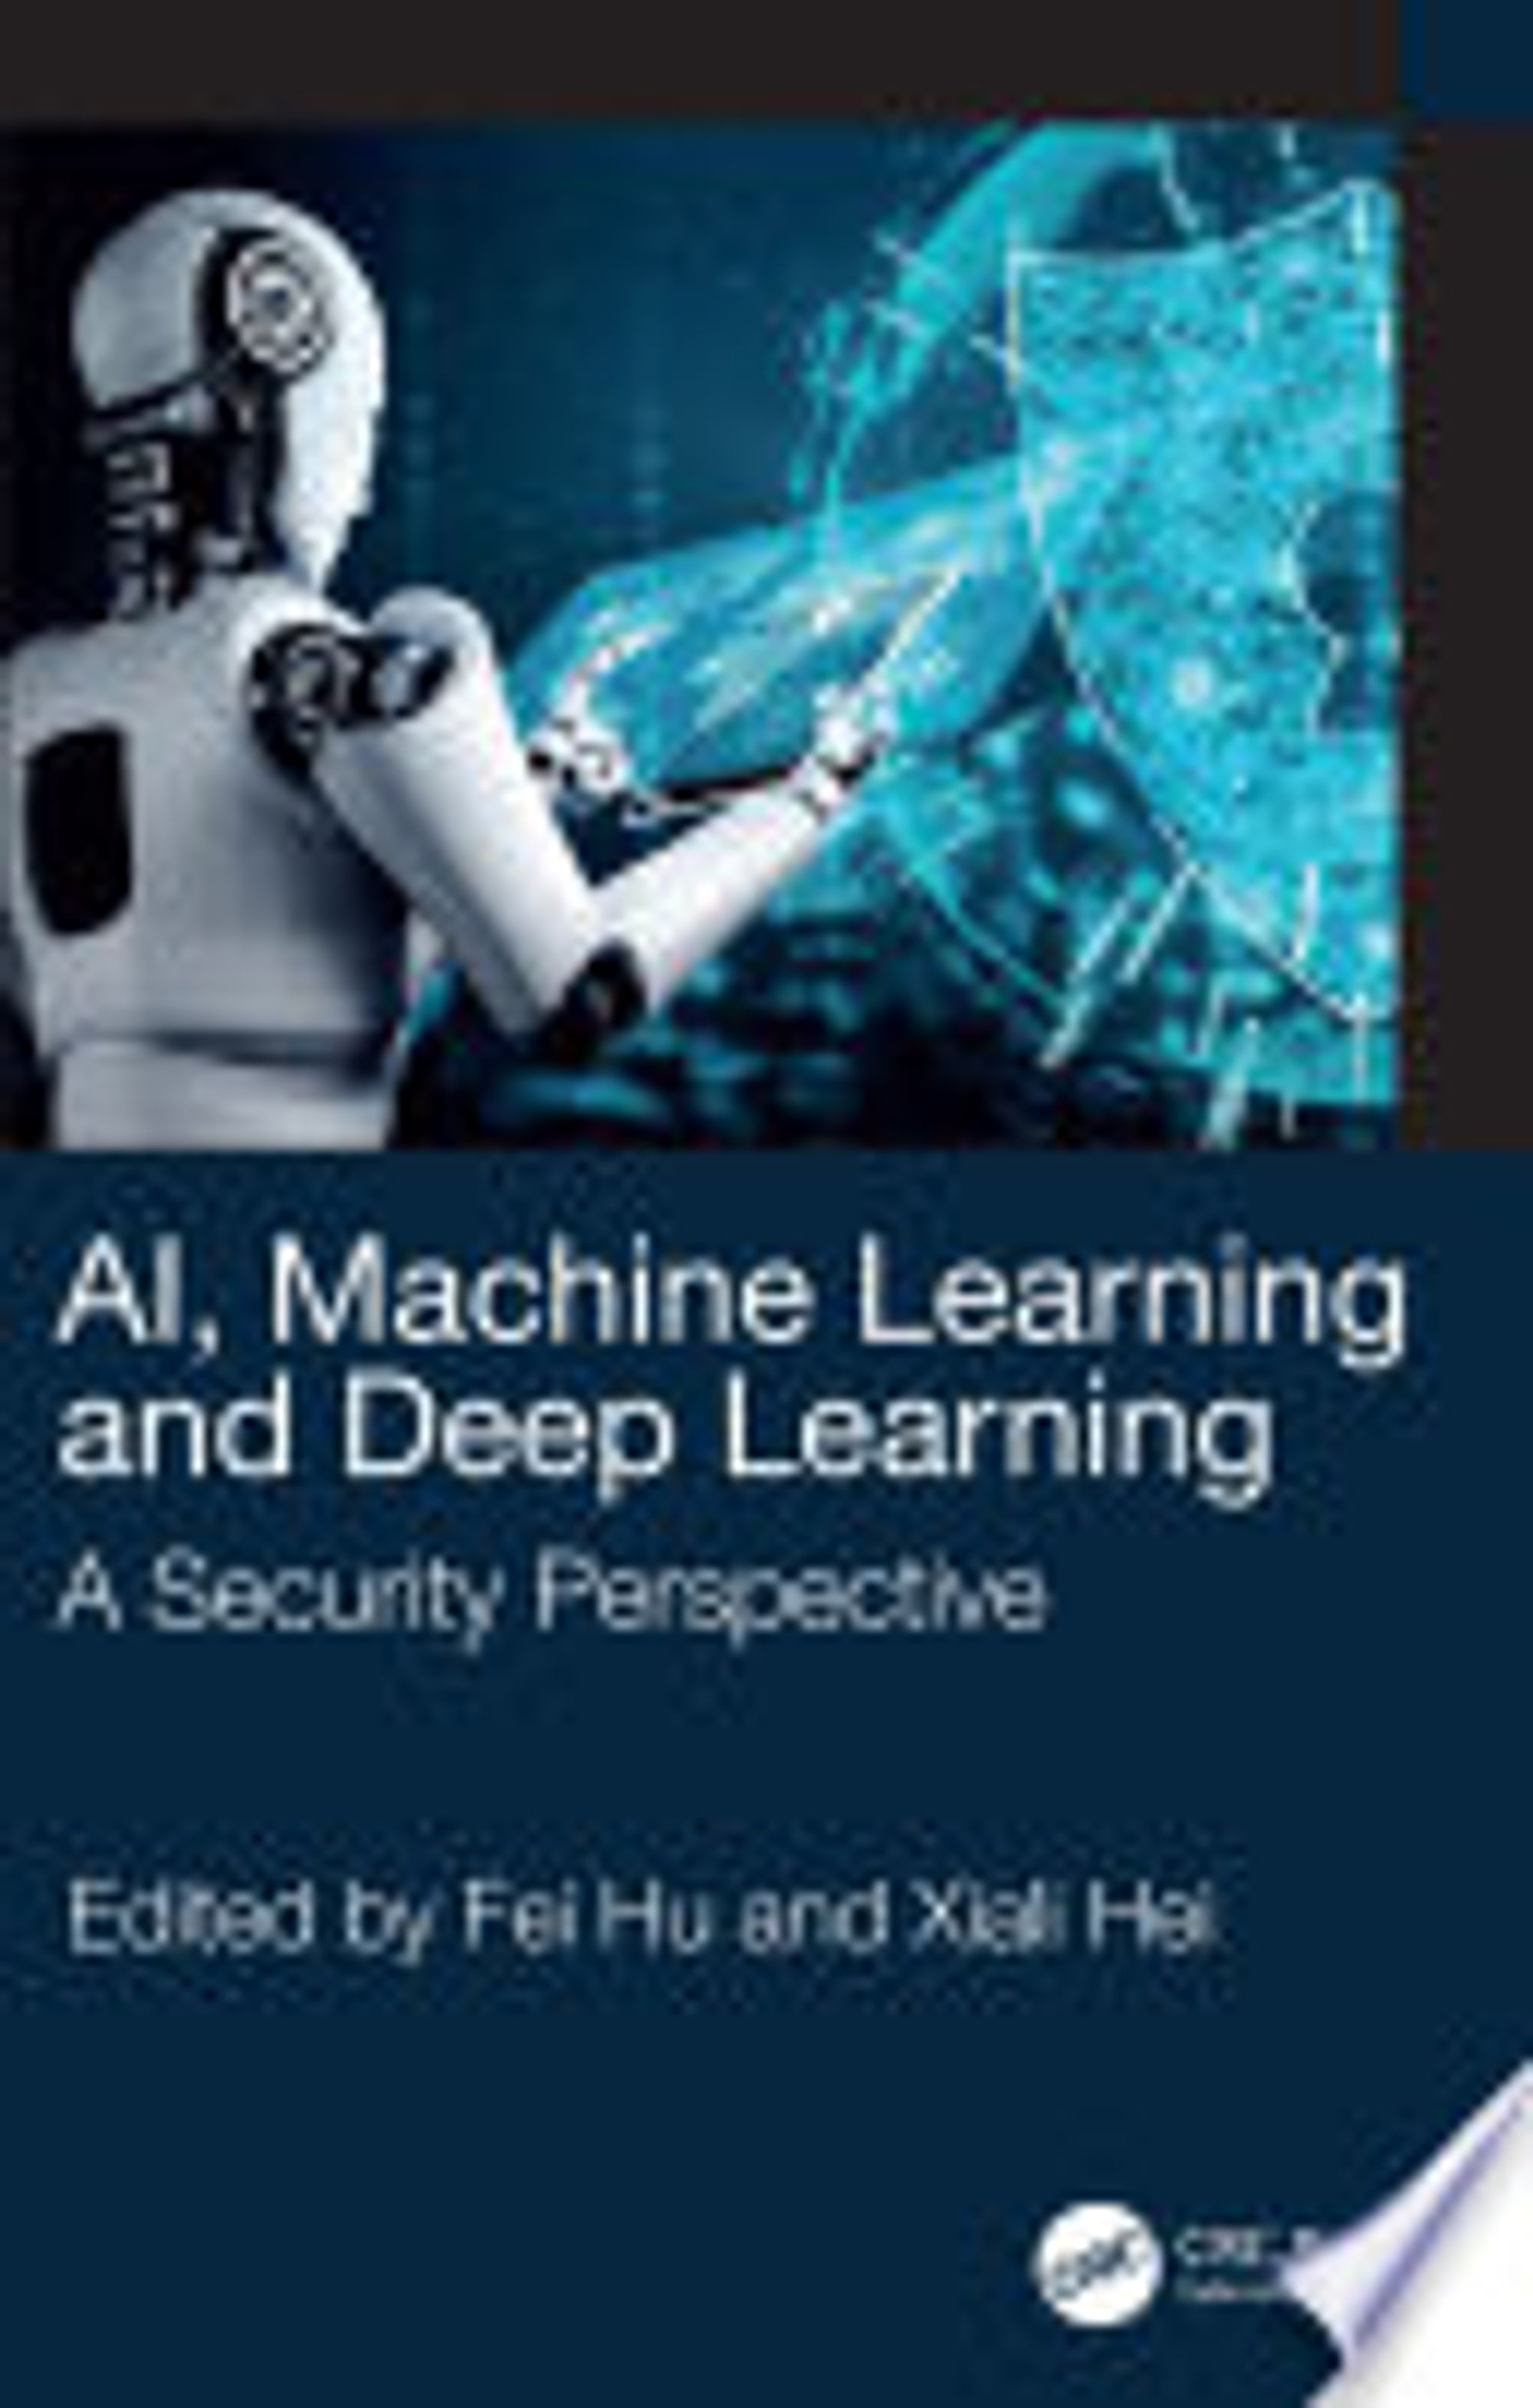 AI, Machine Learning and Deep Learning